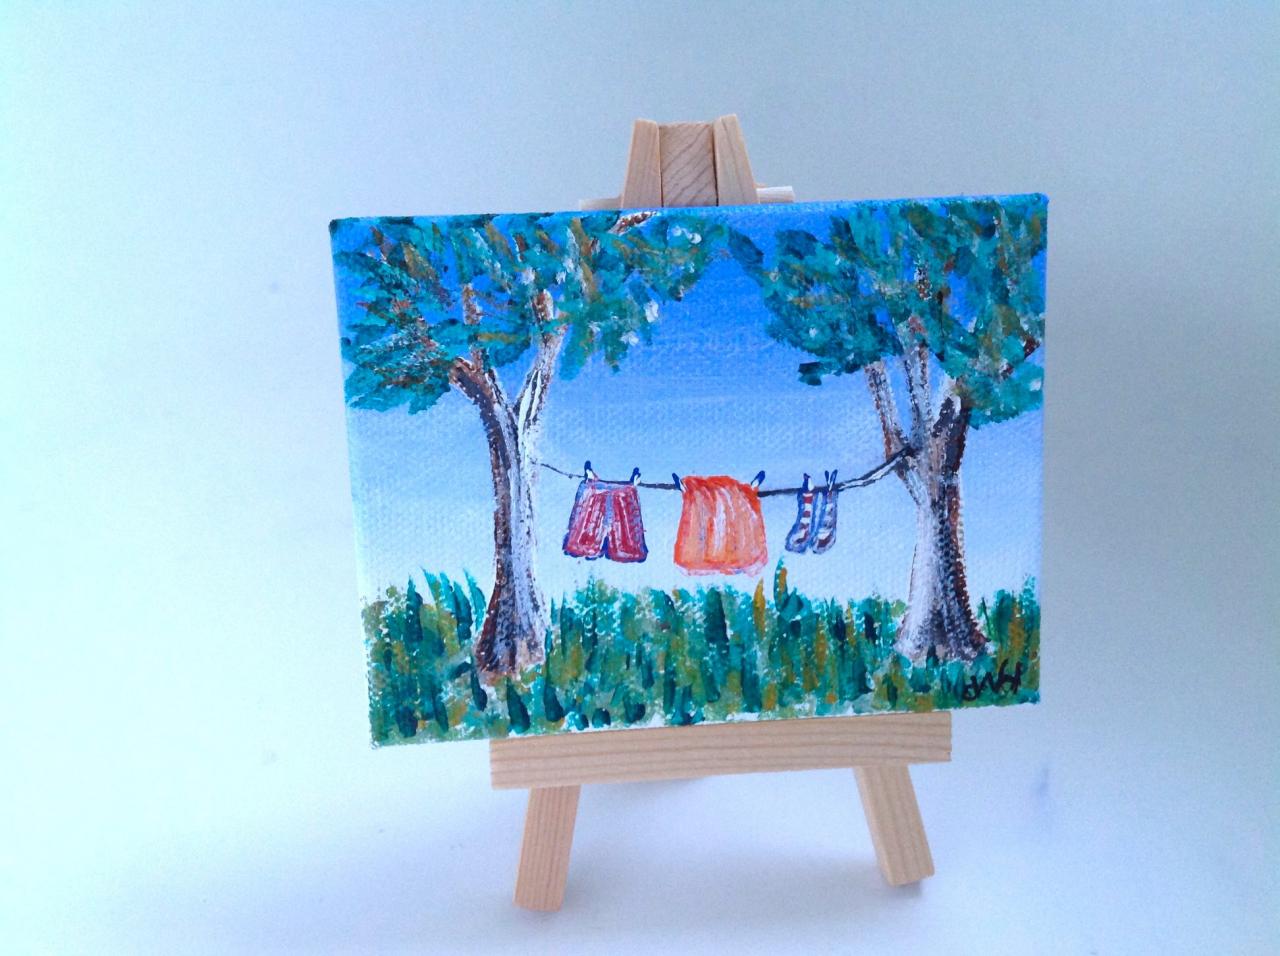 Original Art On Canvas, Wash Day Painting, Small Painting, Collectable Art, Tiny Art, Miniature, Clothsline Painting, Rabbits, Landscape, Farm